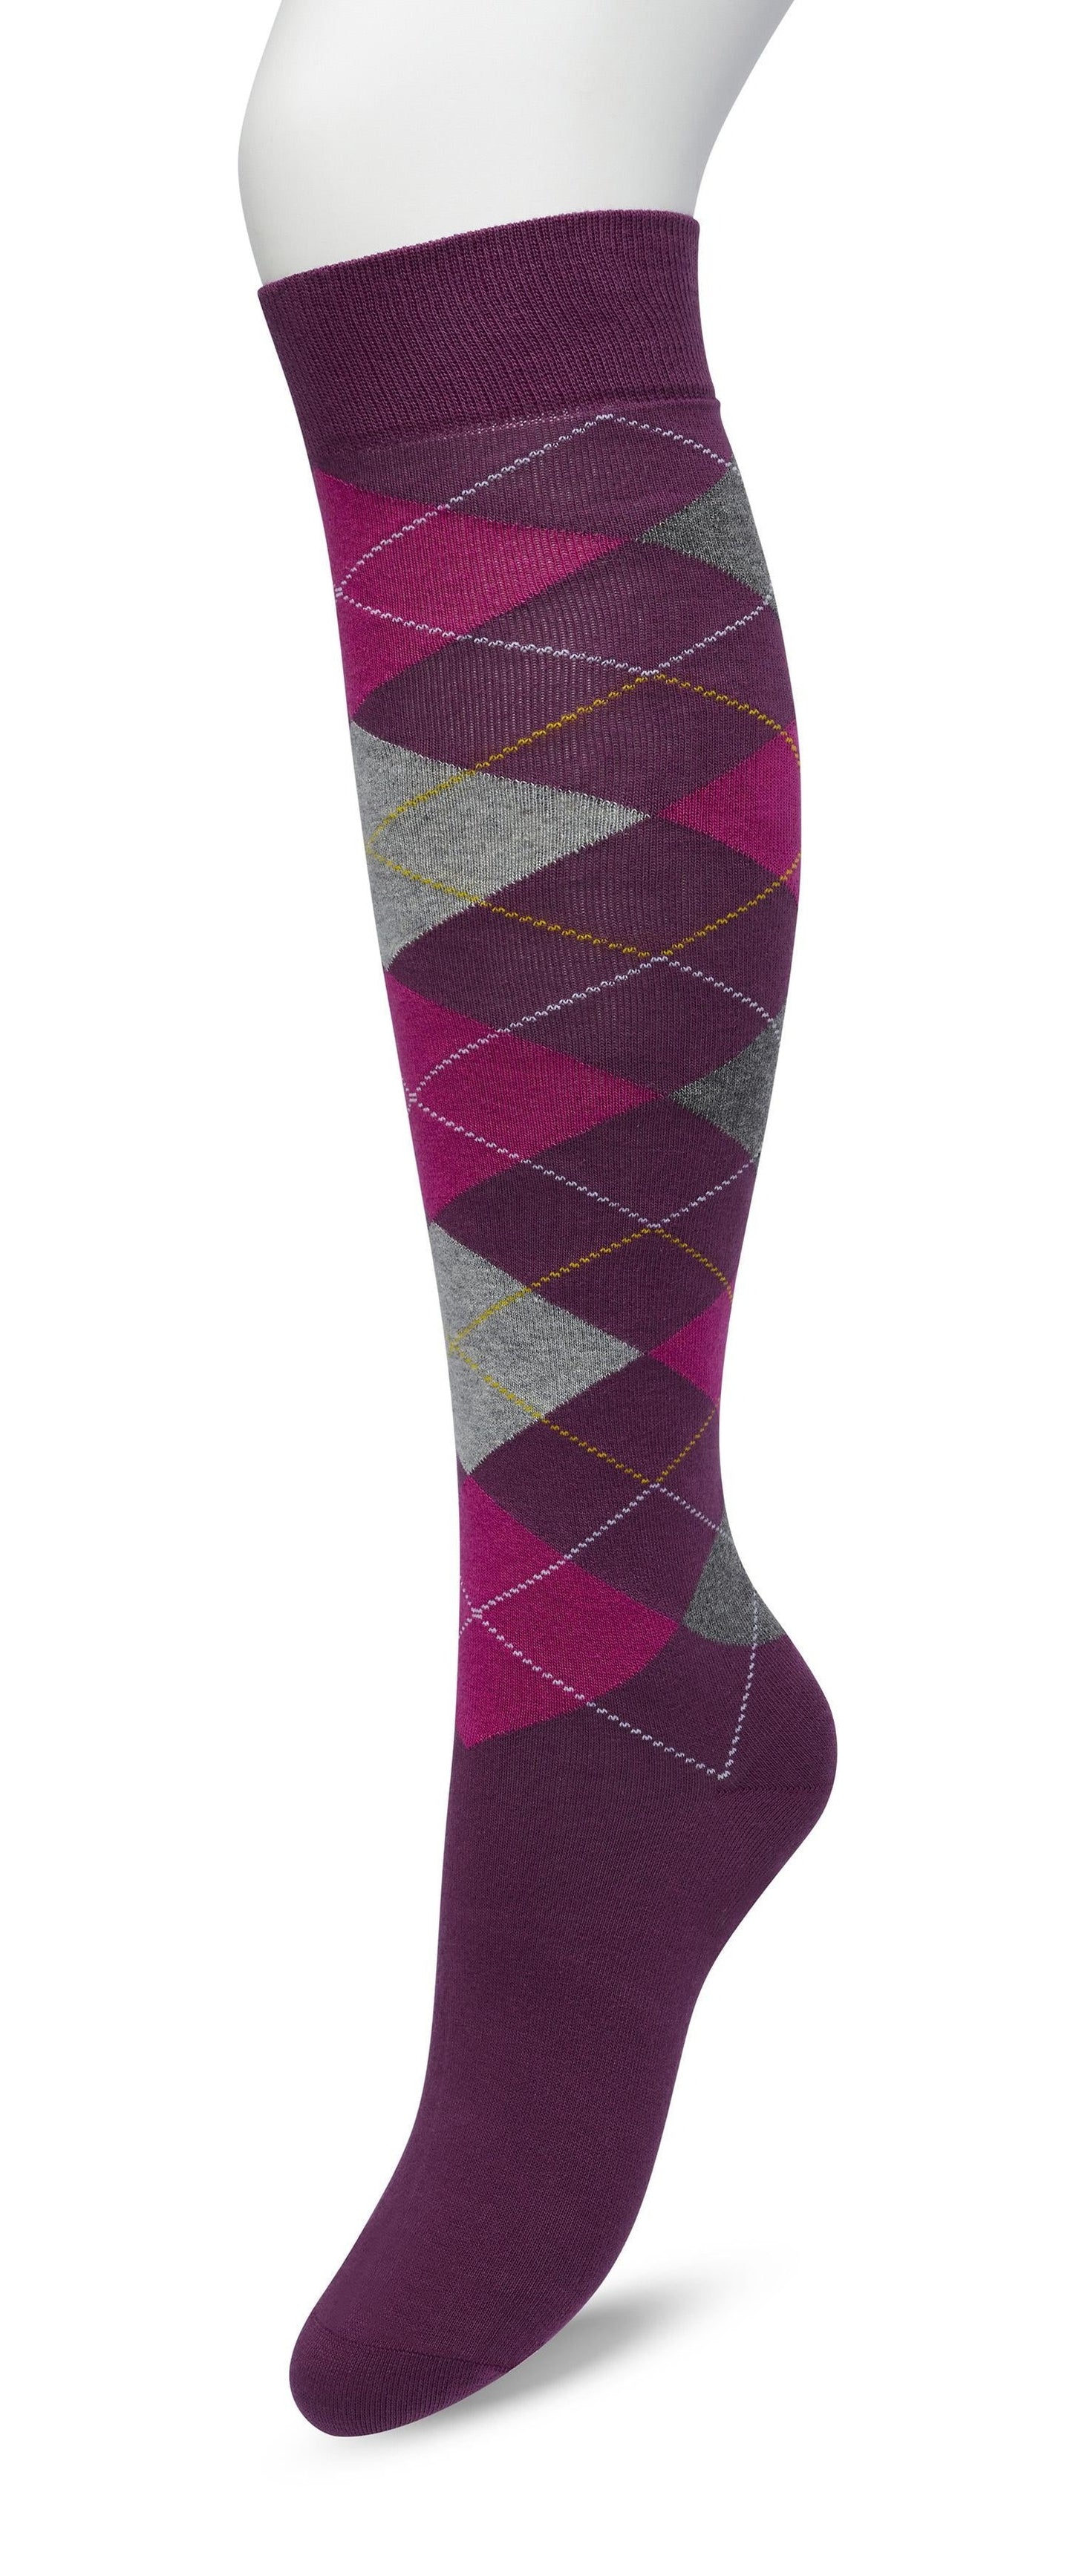 Bonnie Doon BP211505 Argyle Knee-highs - Golf style knee-high socks with a diamond argyle tartan check pattern in grey, pink and berry purple.